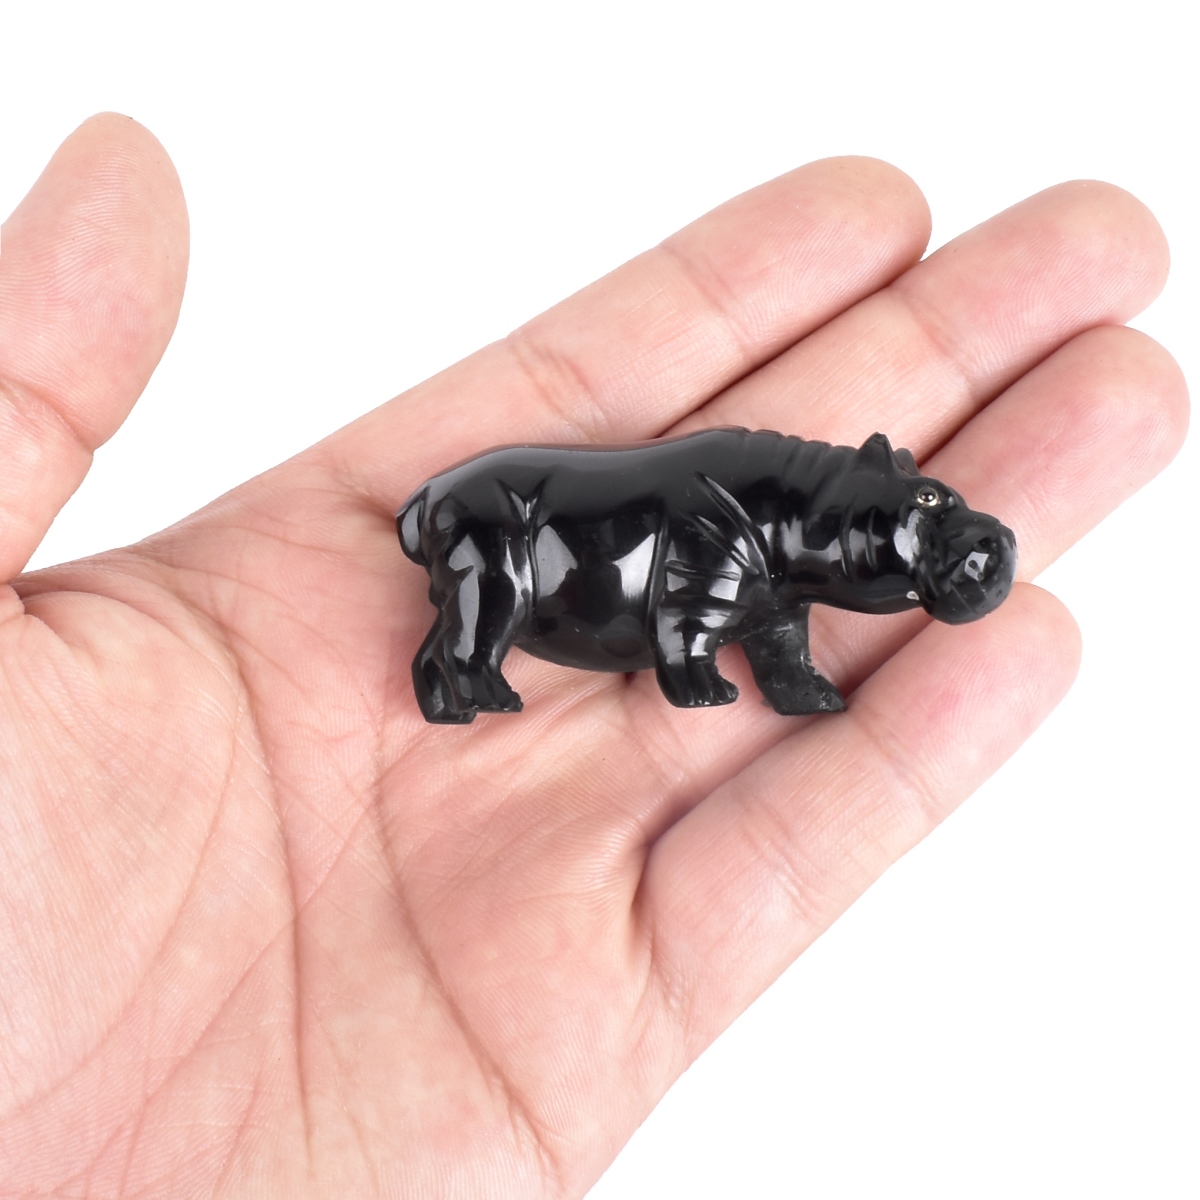 Russian Carved Obsidian Hippo Figure